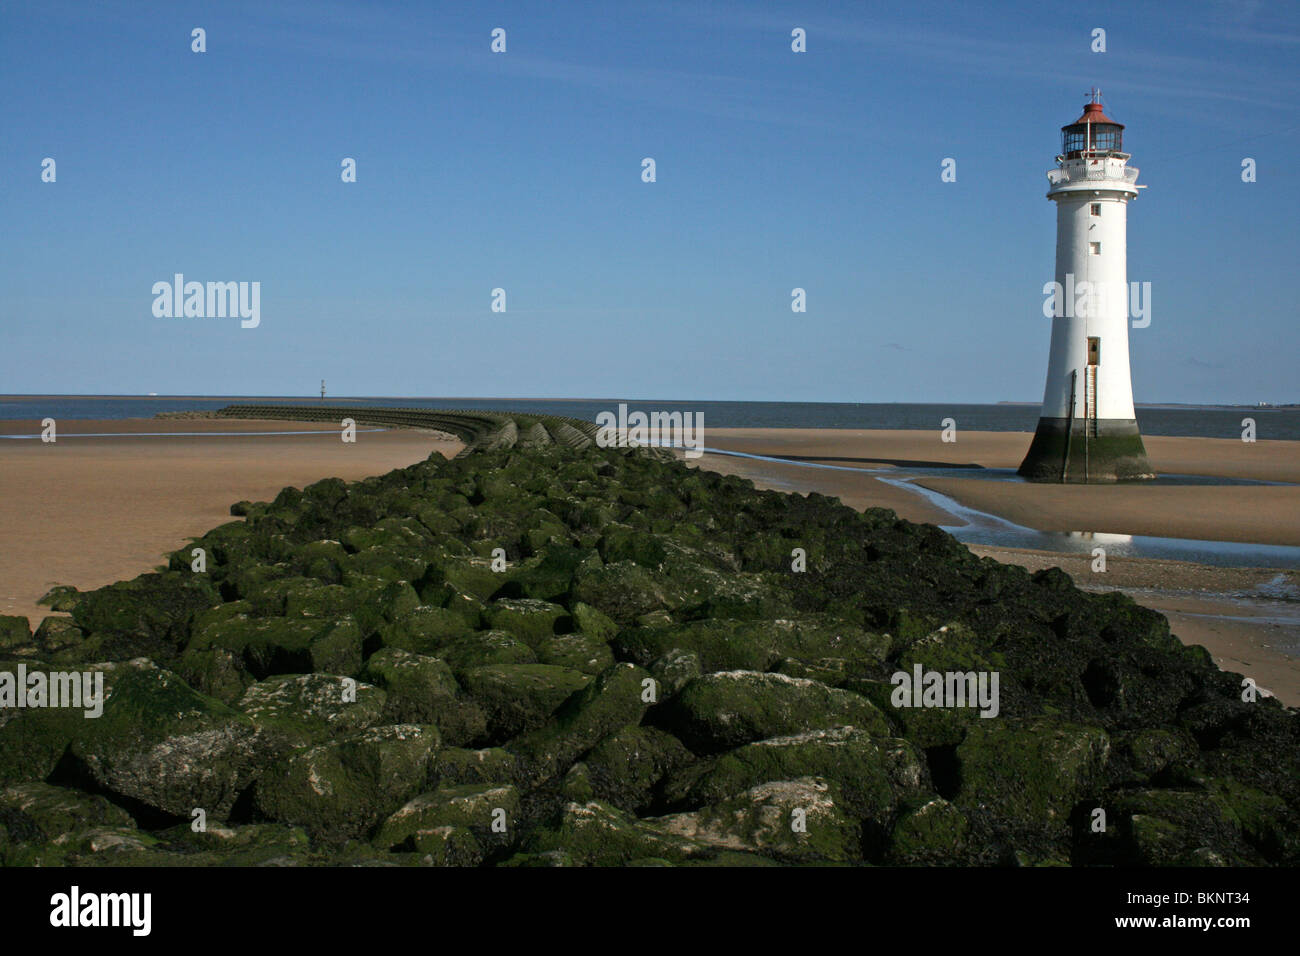 New Brighton Lighthouse Beside The Sea Defence Groyne, Wallasey, The Wirral, Merseyside, UK Stock Photo